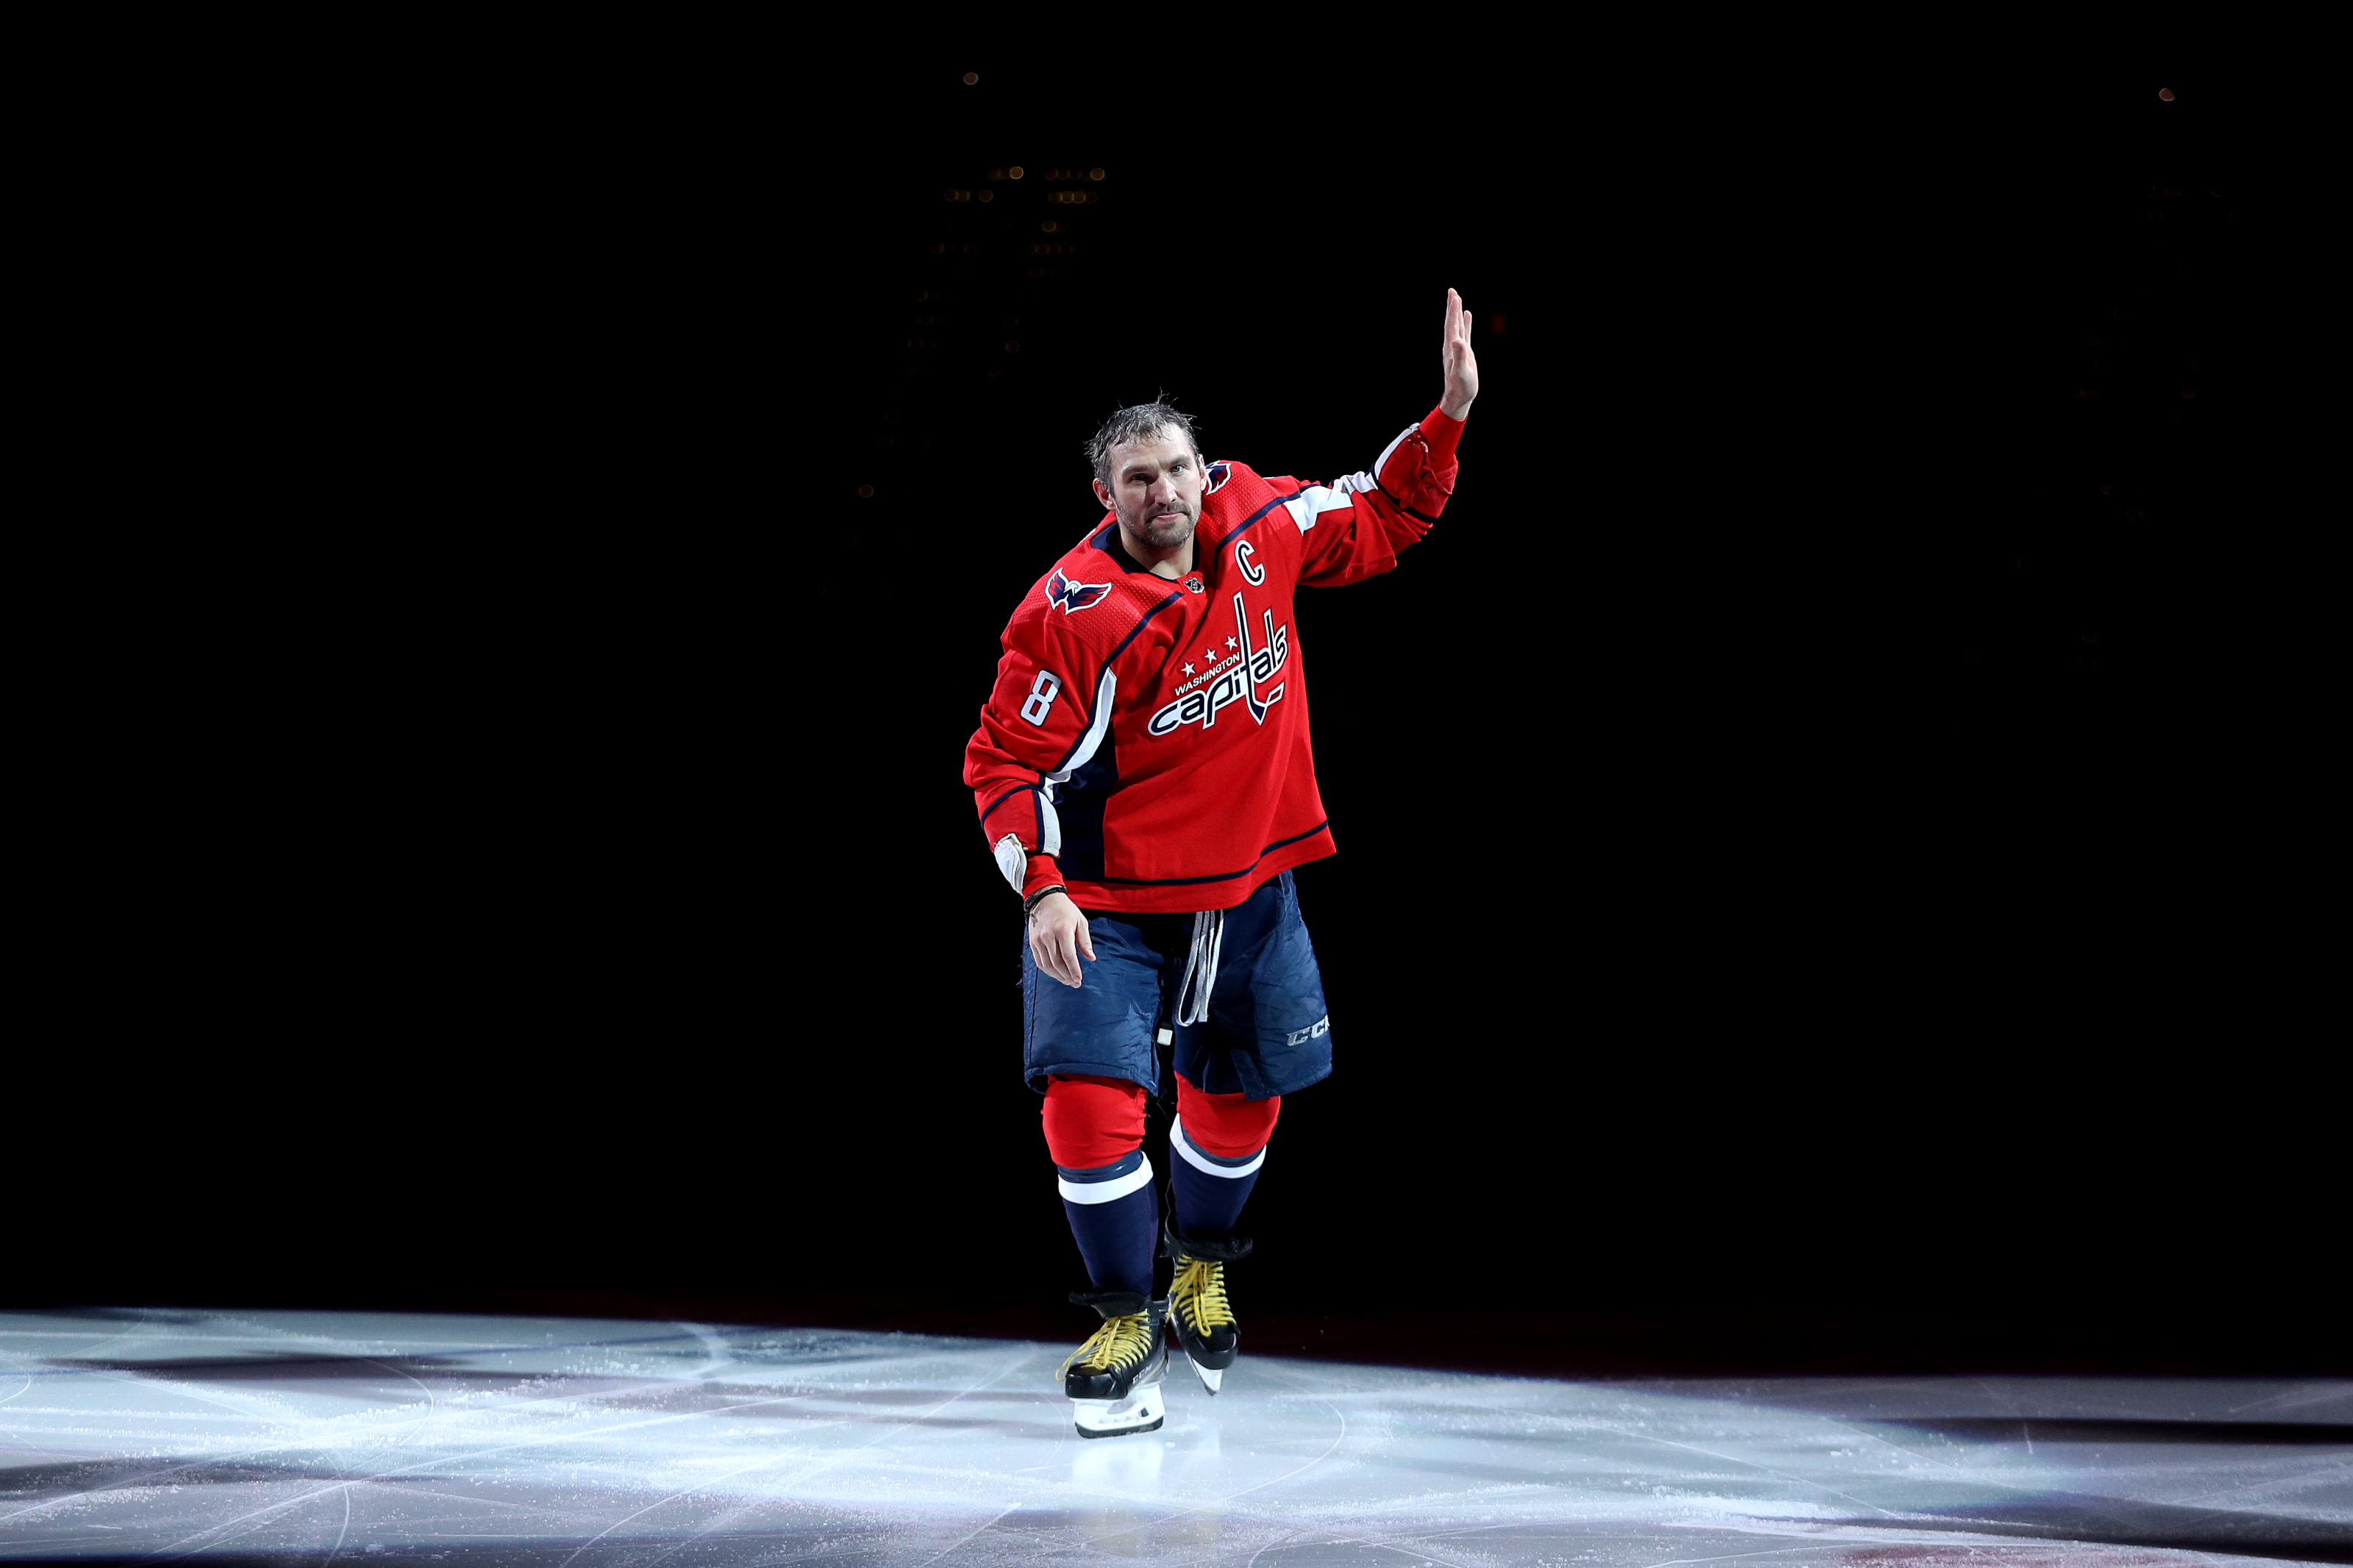 Washington Capitals: The greatness that is Alex Ovechkin